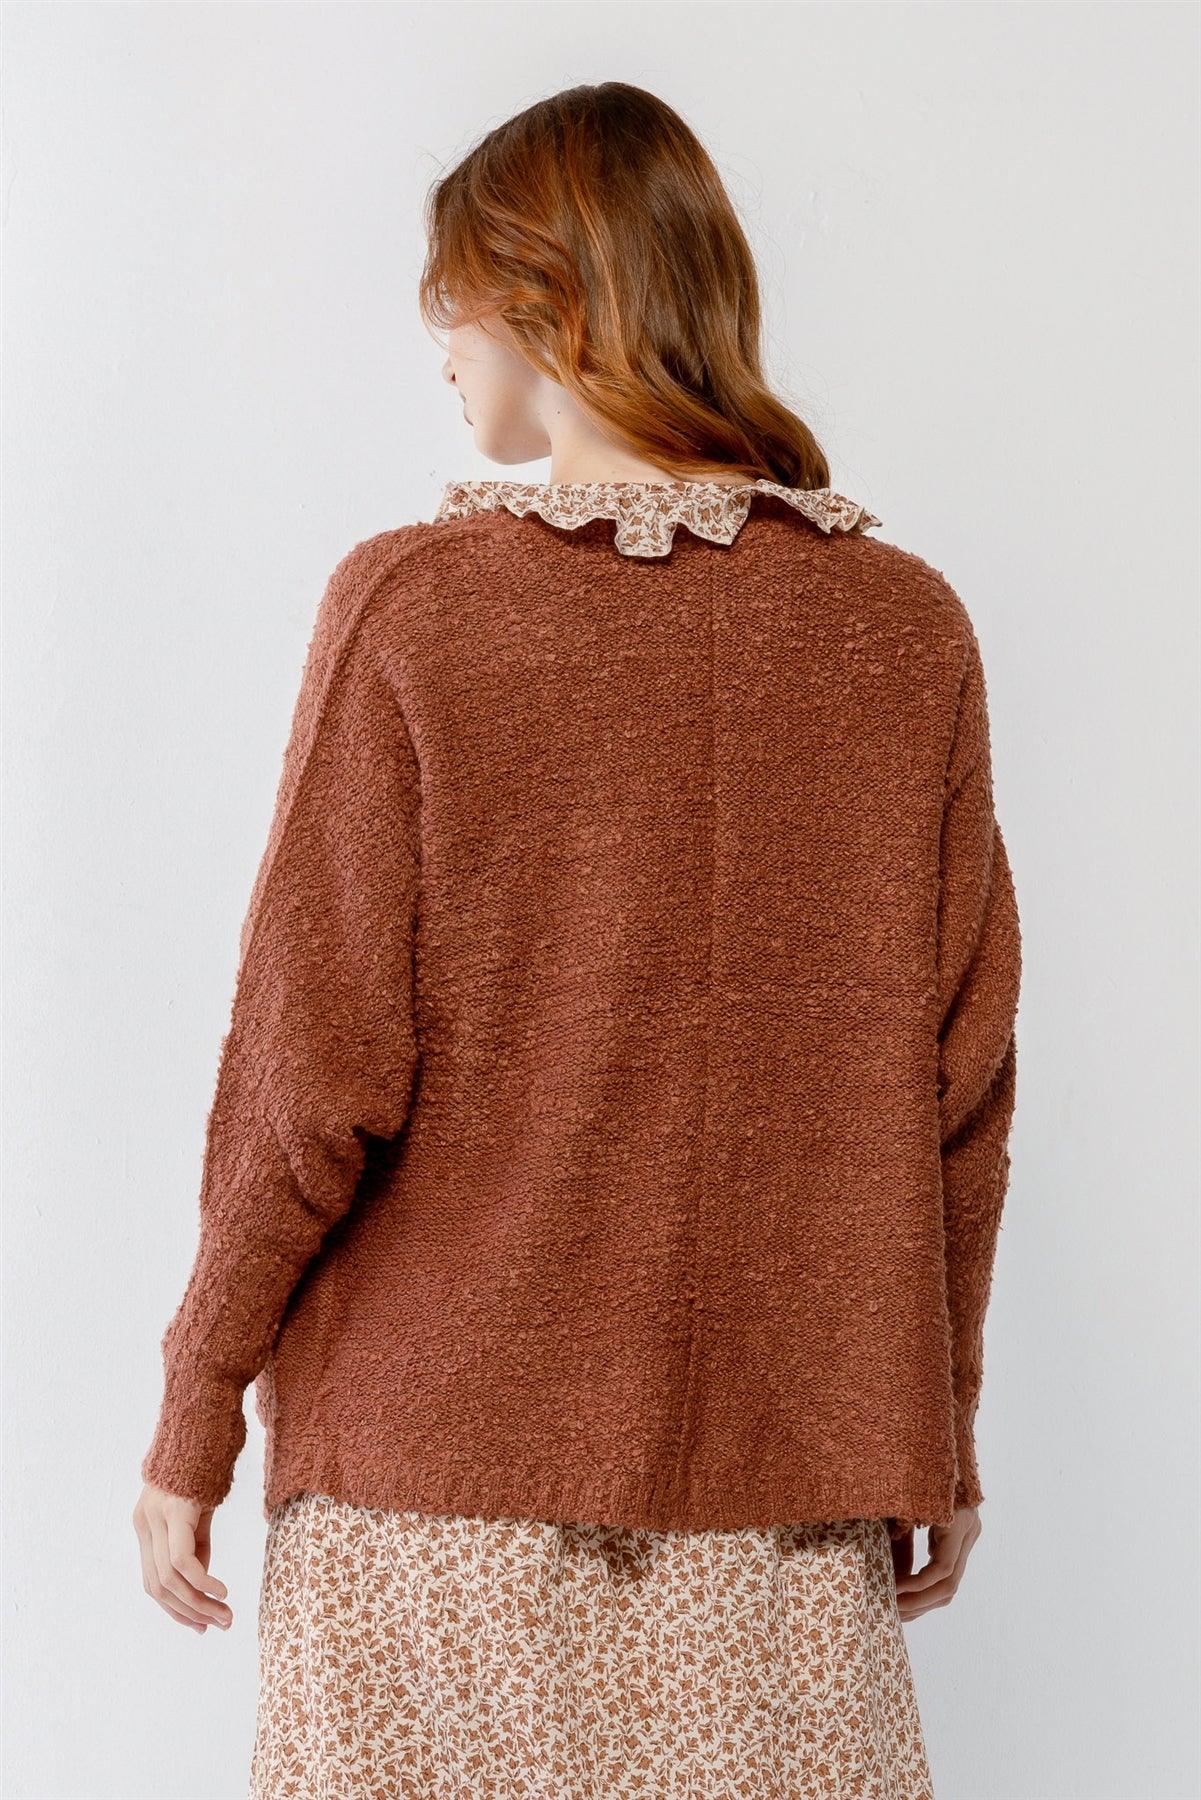 Brick Knit Textured Two Pocket Open Front Cardigan /2-2-2